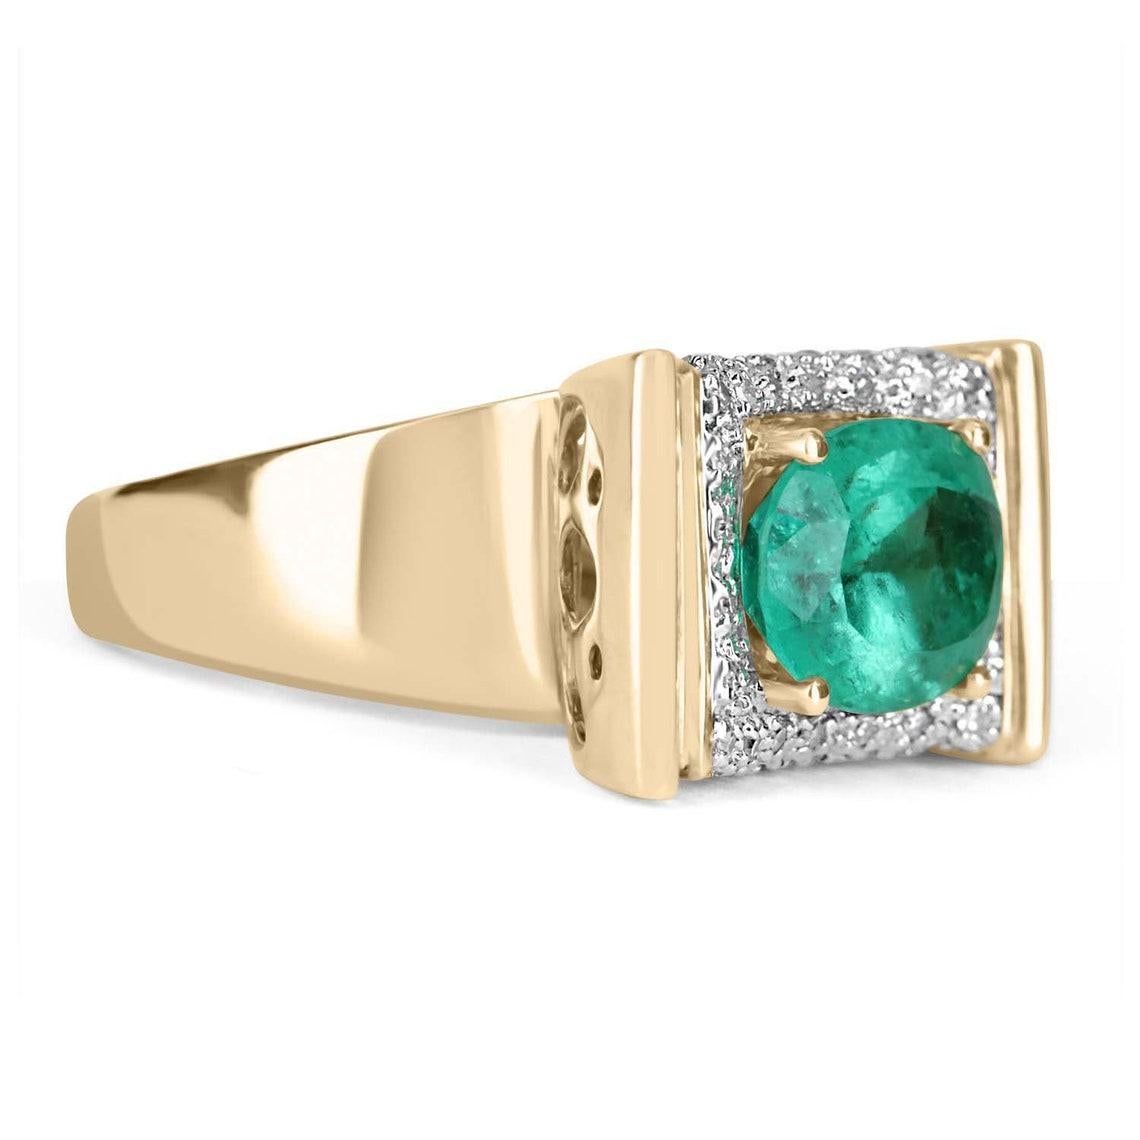 An East-to-West statement or right-hand retro ring was handcrafted and estimated around the vintage 1950s. Dexterously made in gleaming 14K gold this beautiful ring features a 5.60-carat natural Colombian emerald-oval cut. Set in a four-prong